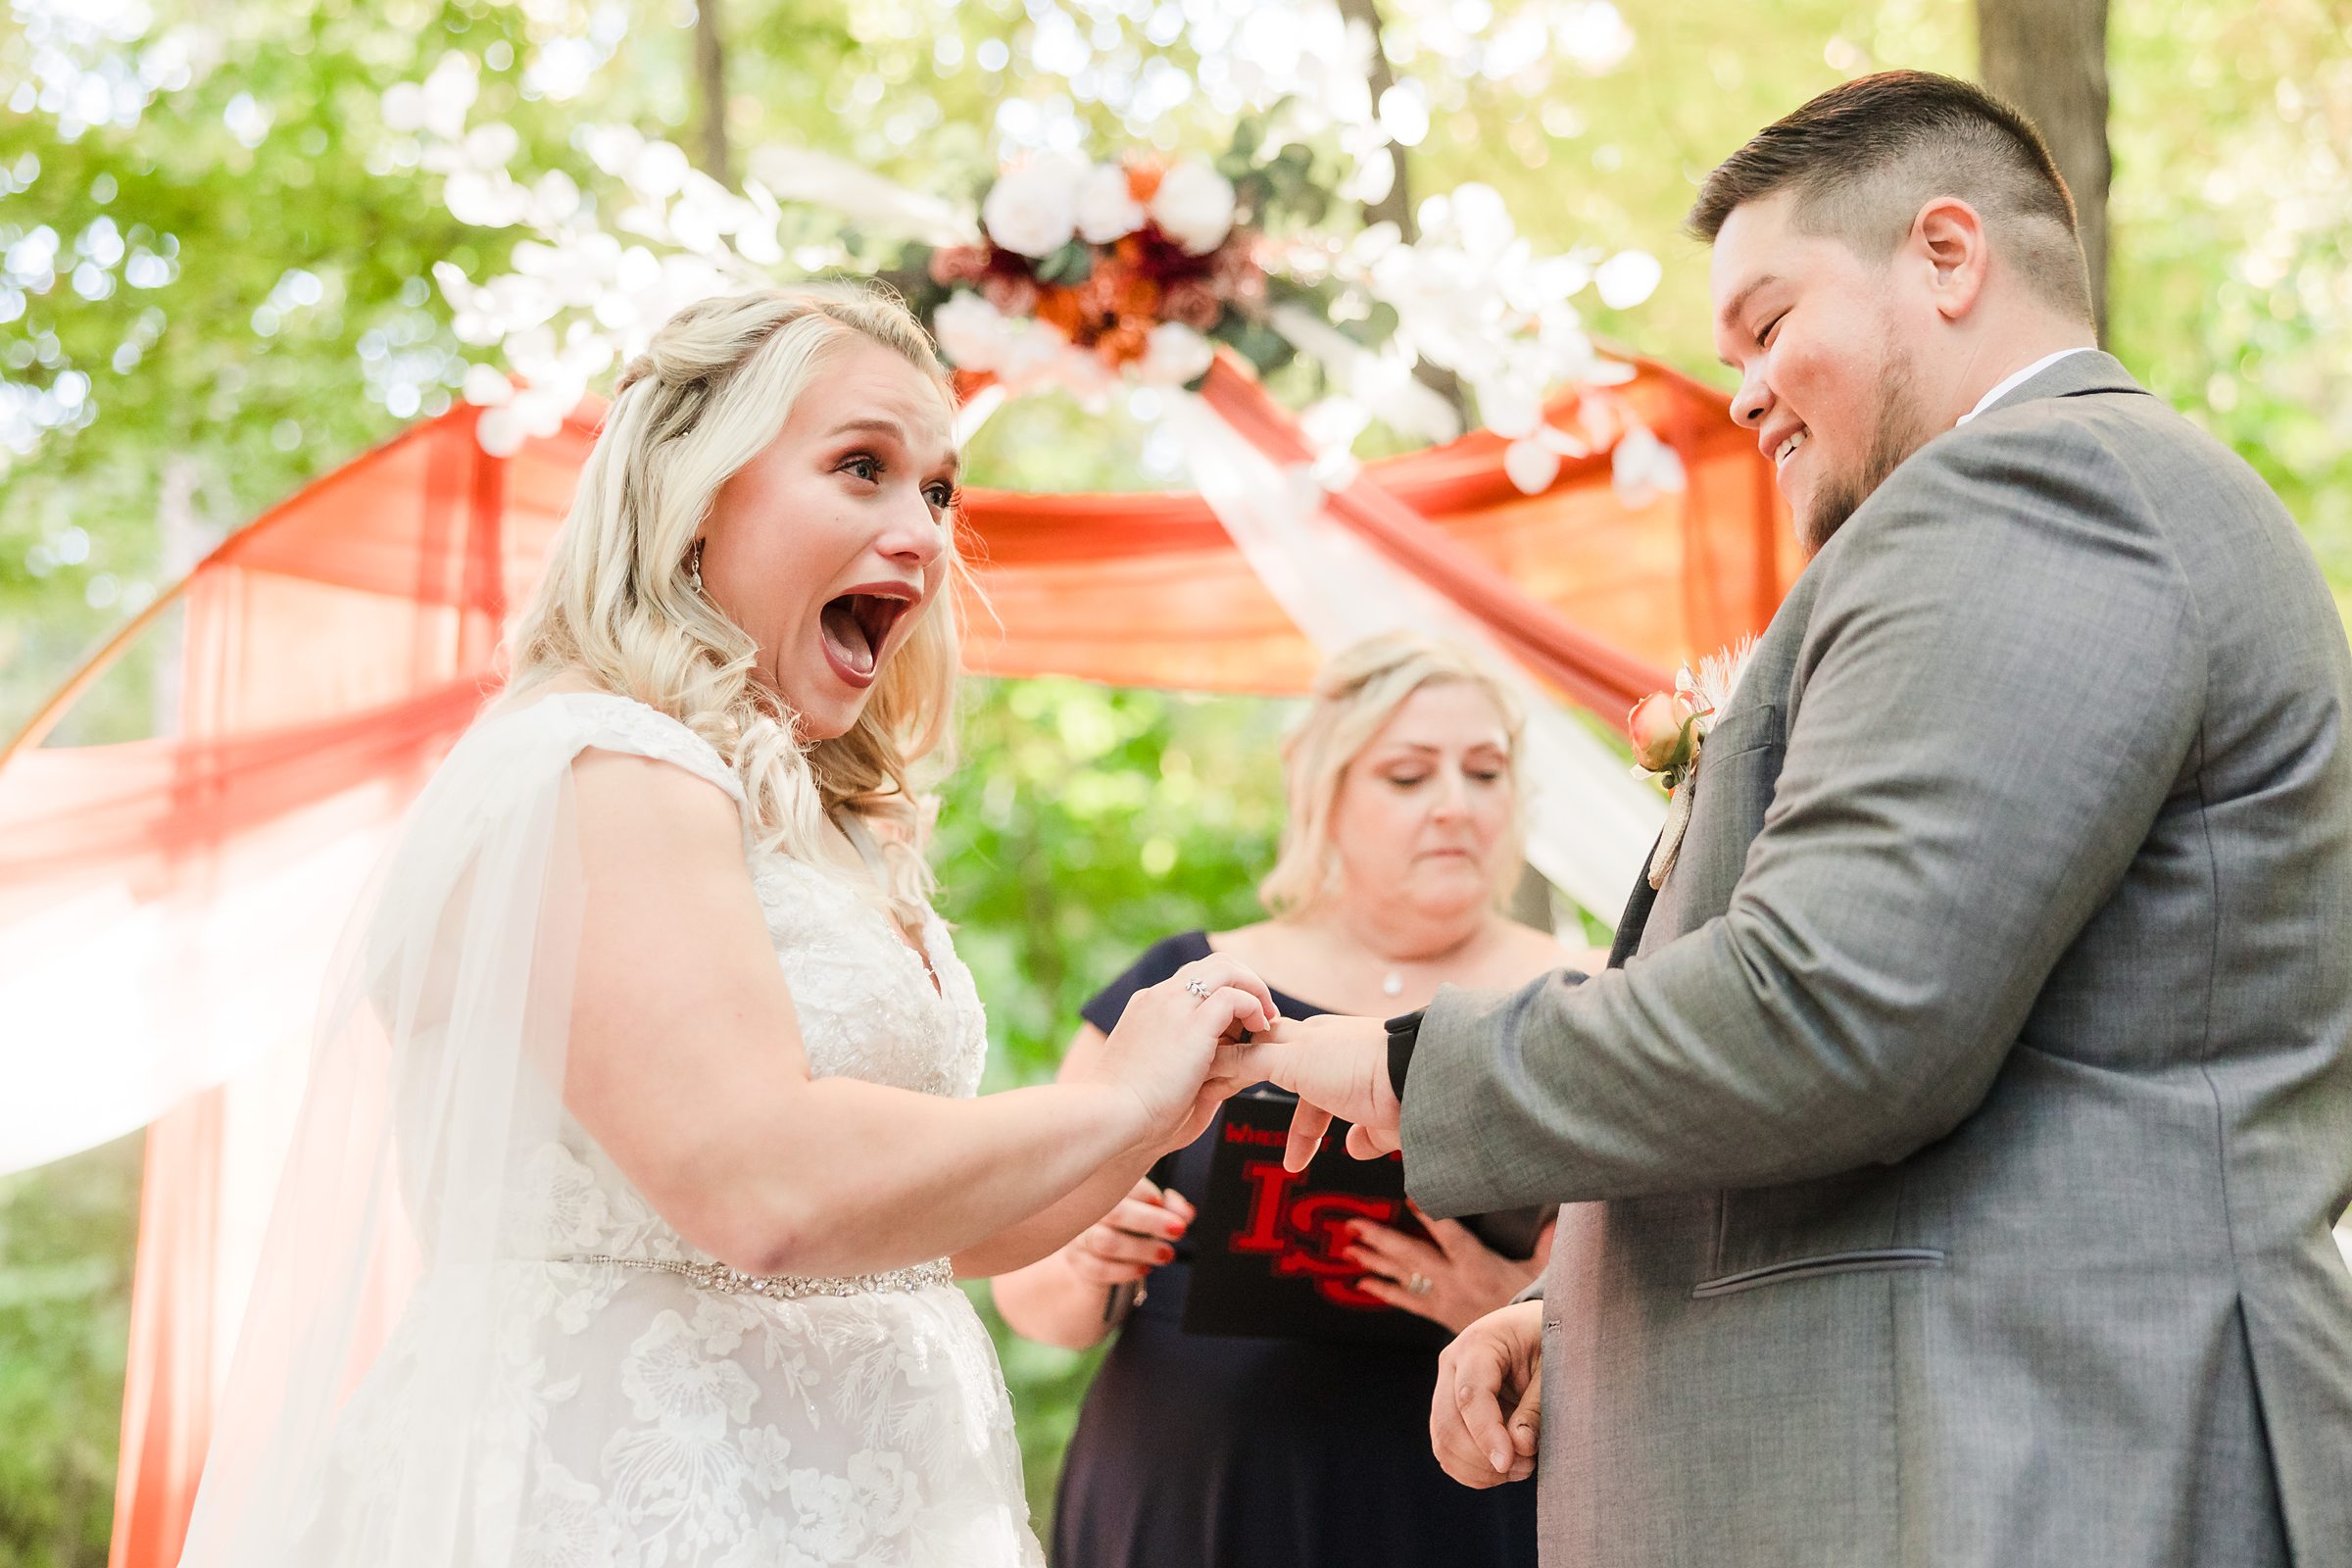 Bride is shocked during a wedding ceremony at Funks Grove in Mclean, Illinois.